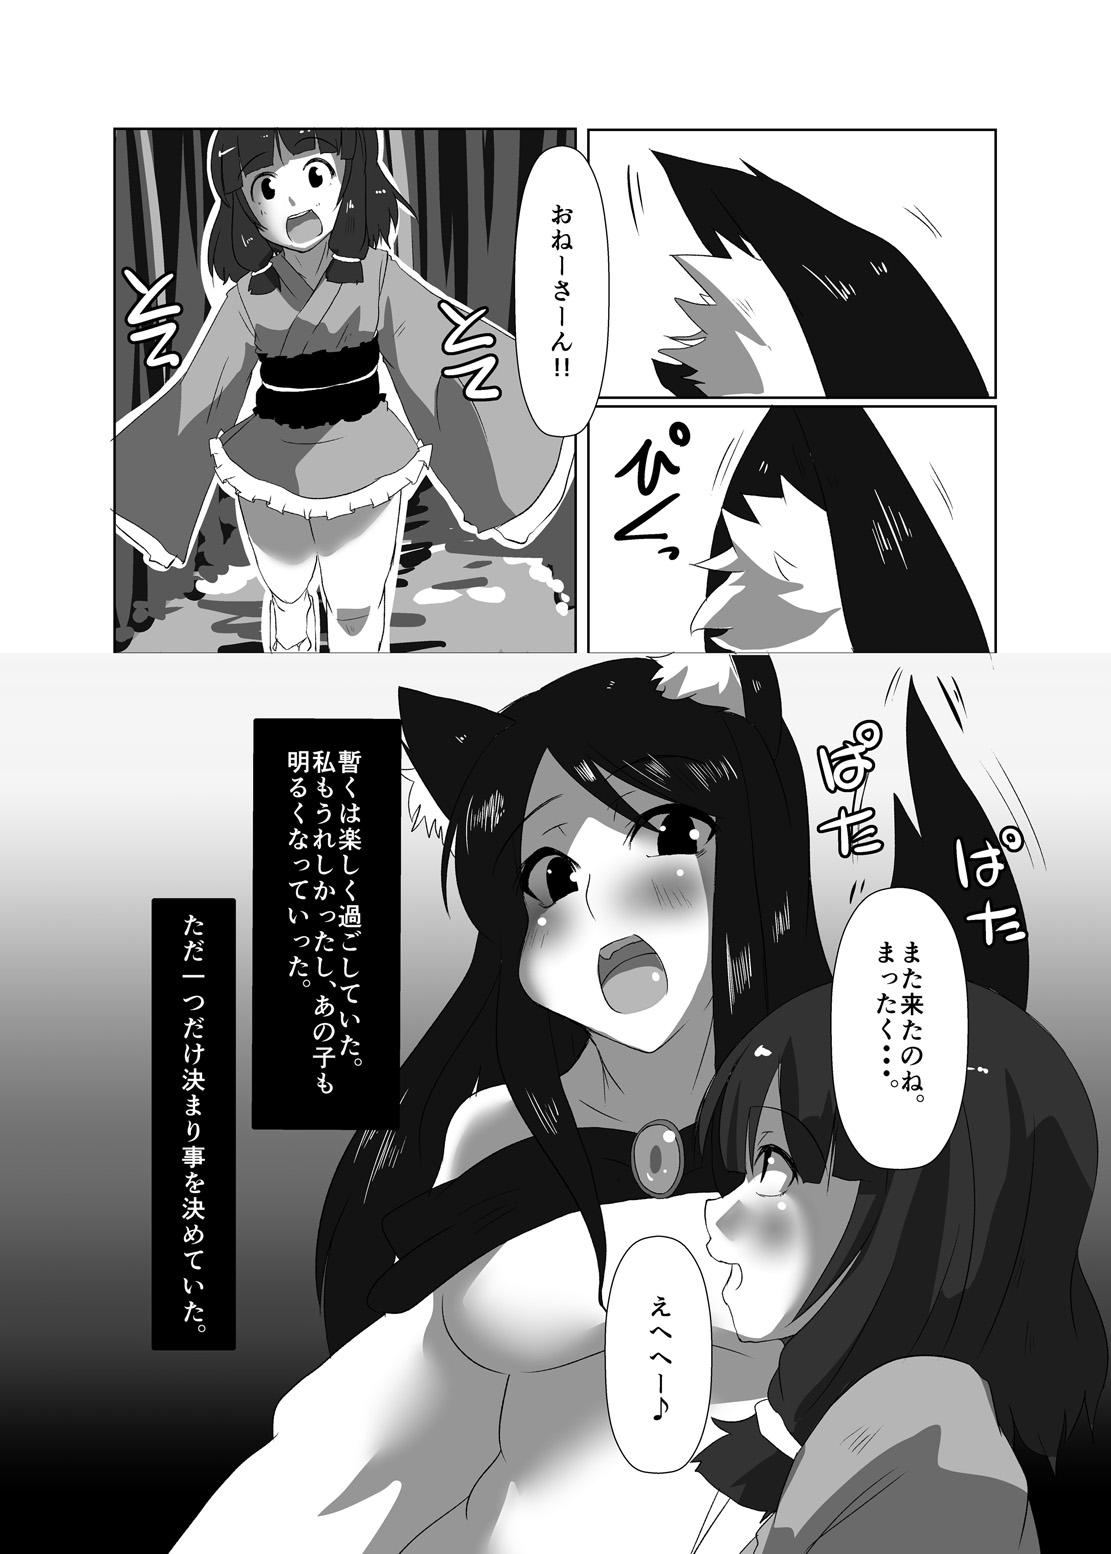 Interracial Sex ELonely Wolf no Onee-san - Touhou project Pov Blowjob - Page 12